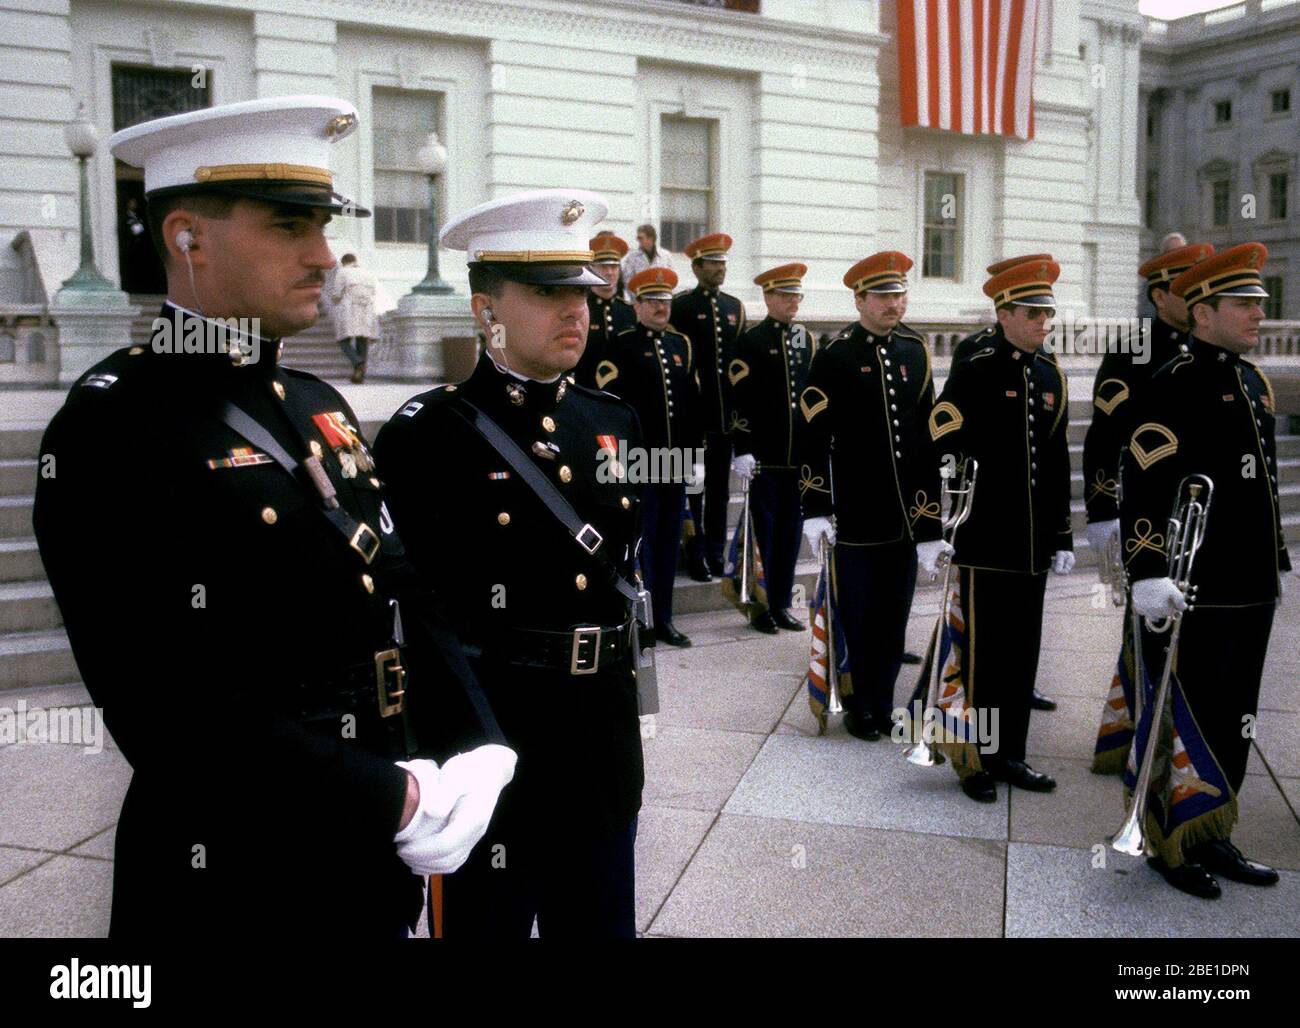 Two Marine Corps captains in full dress blues, wearing the famous Sam Brown belt, watch the U.S. Army Herald Trumpeters get into formation on Inauguration Day. Stock Photo